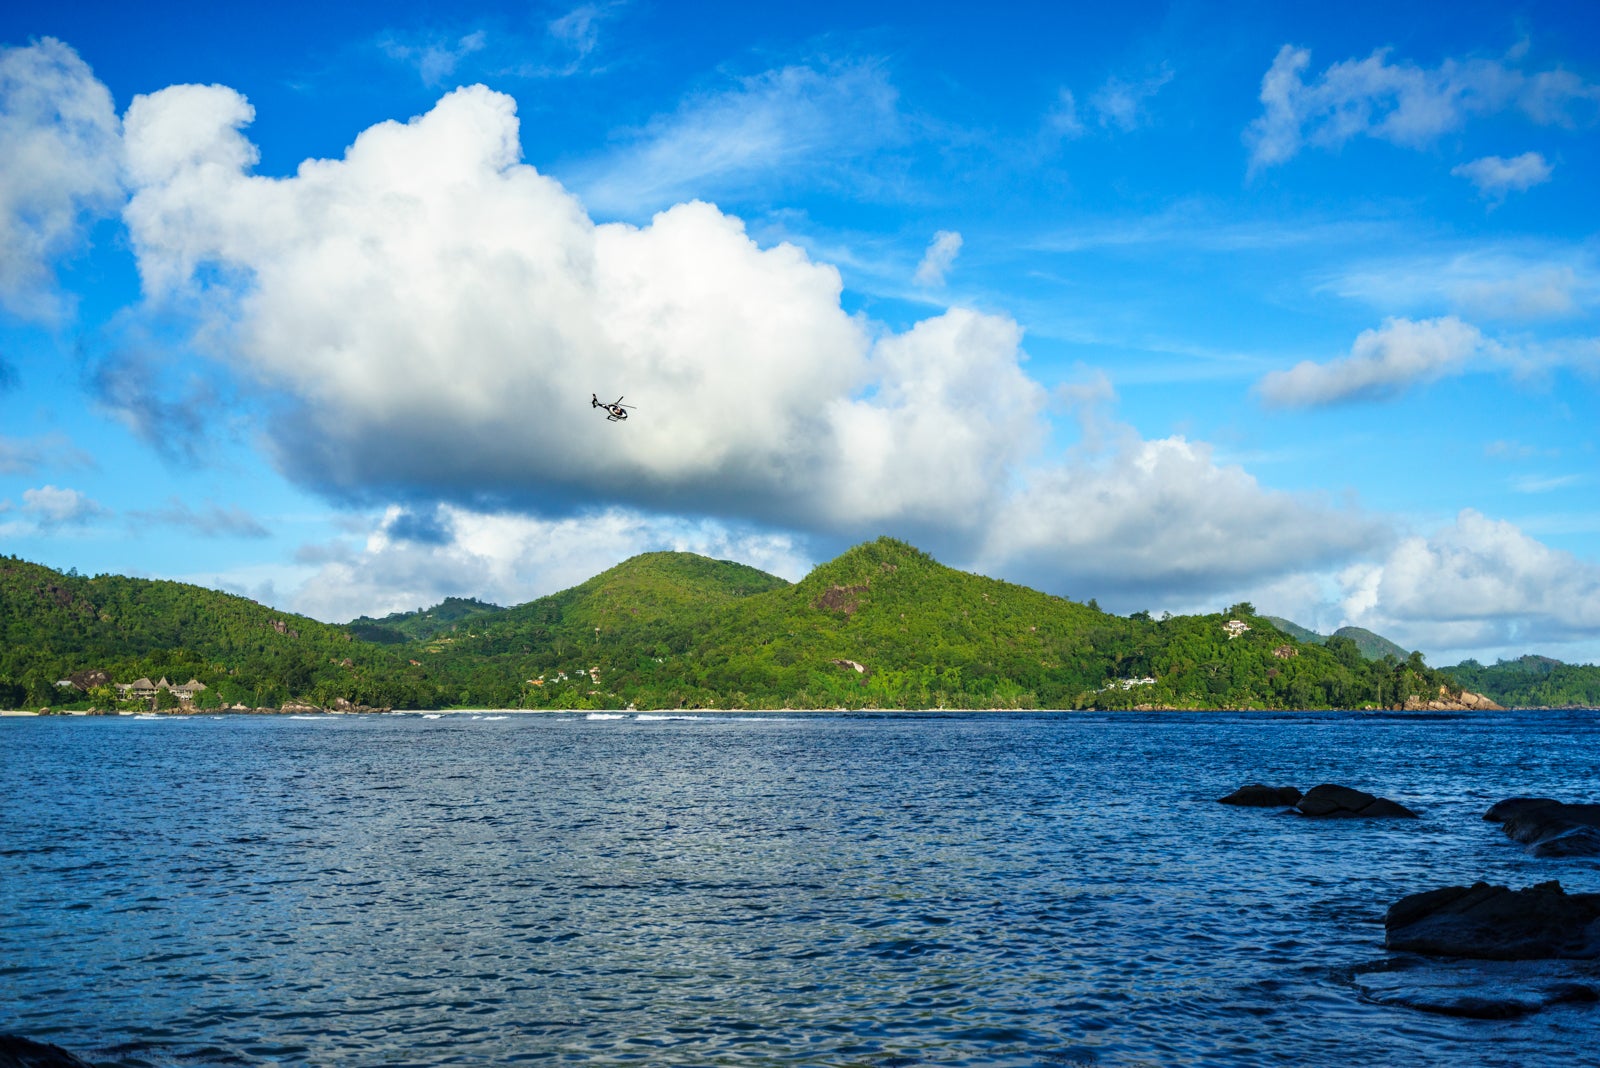 A helicopter flies over the Baie Lazare, Seychelles. (Photo via Getty Images)